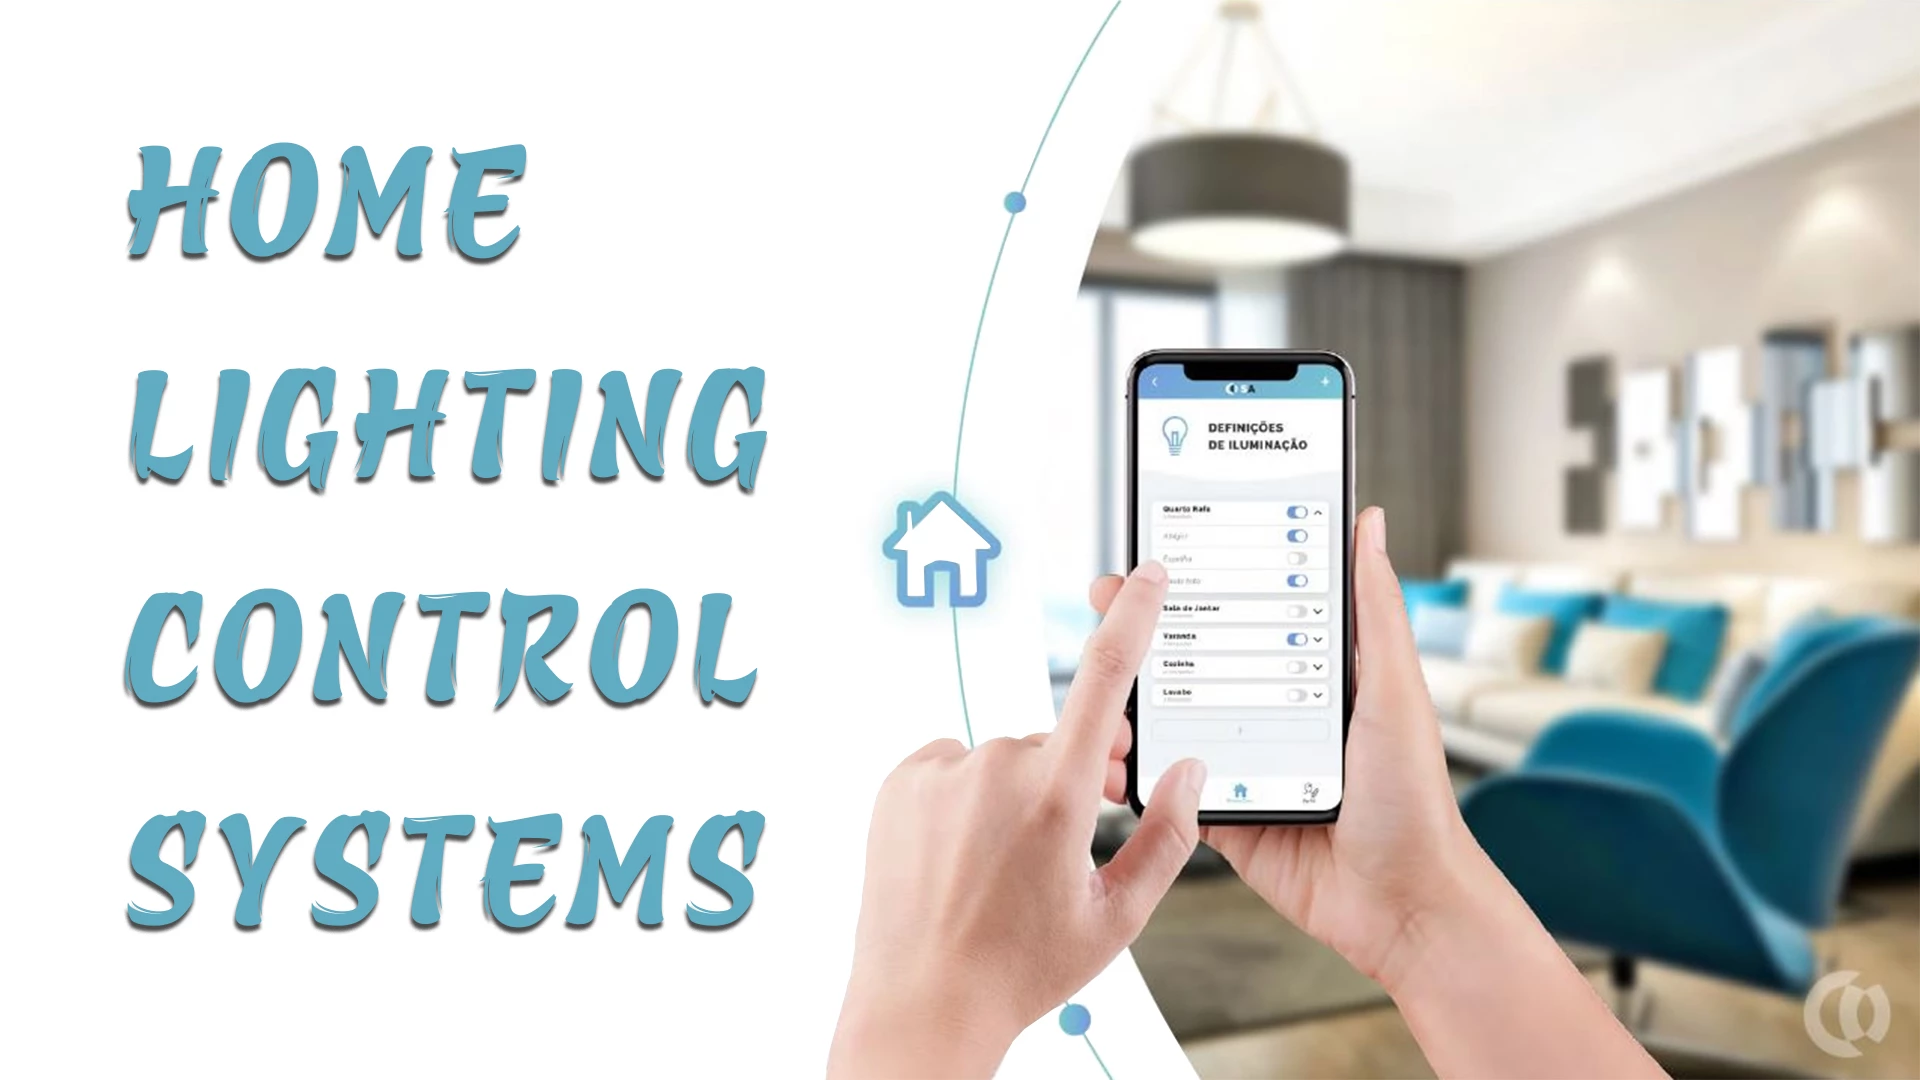 Several types of home lighting control systems